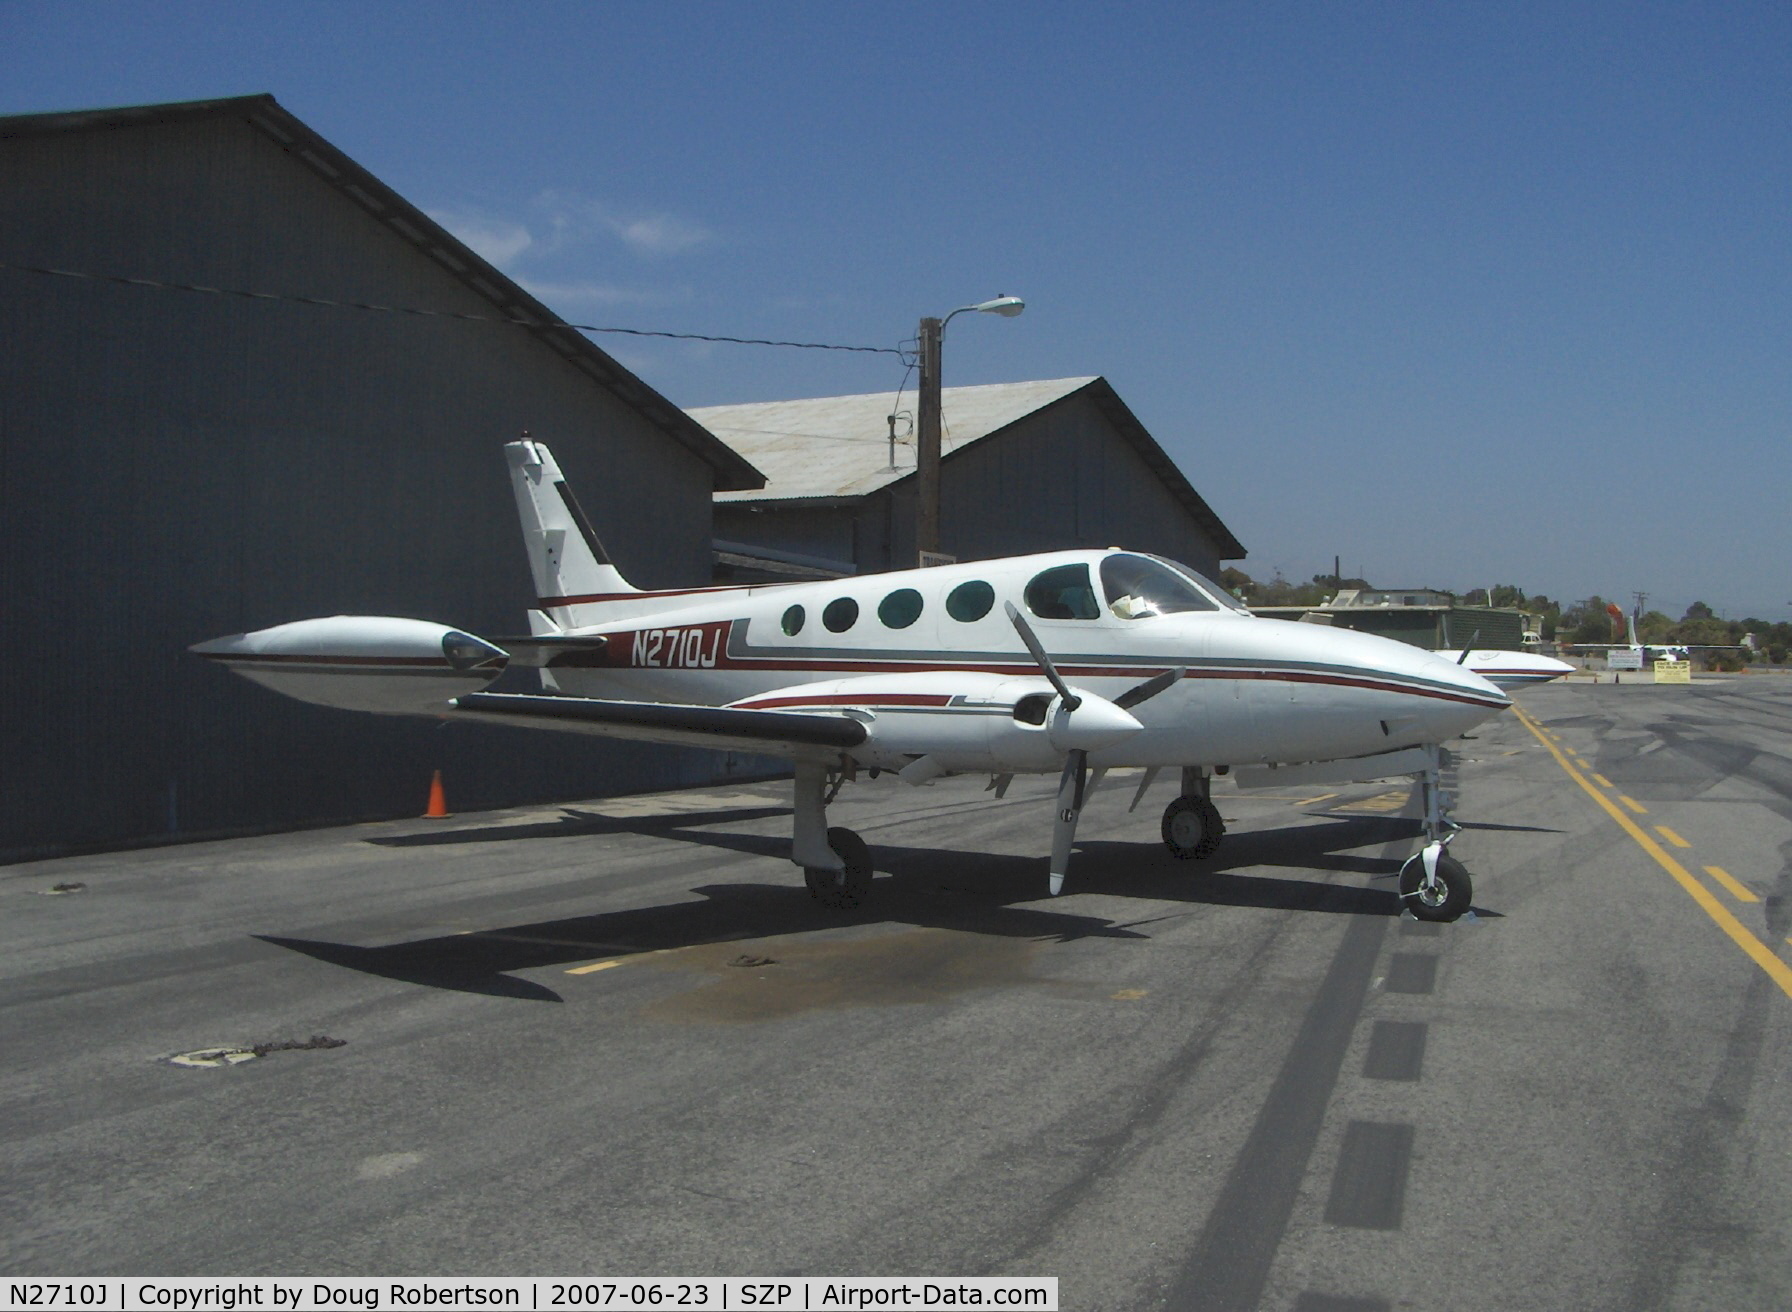 N2710J, 1979 Cessna 335 C/N 335-0043, 1979 Cessna 335, two Continental TSIO-520 300 Hp each, 6 seat light-weight unpressurized version of C340A, only 65 made